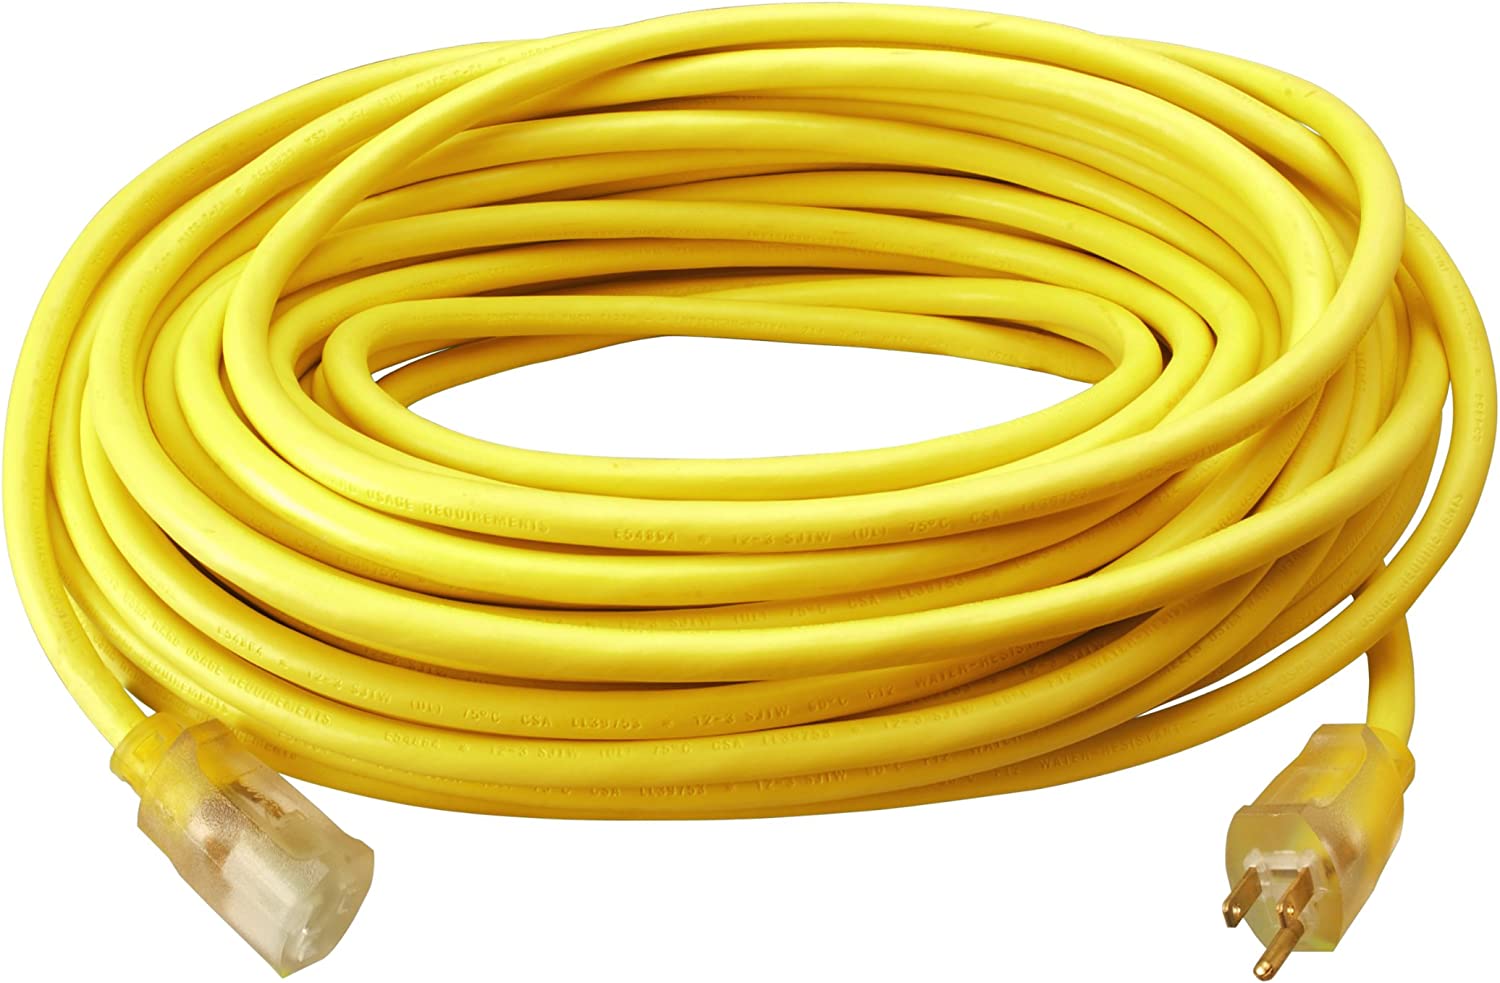 Southwire 2589 100-ft 12/3 15A SJTW Extension Cord $59